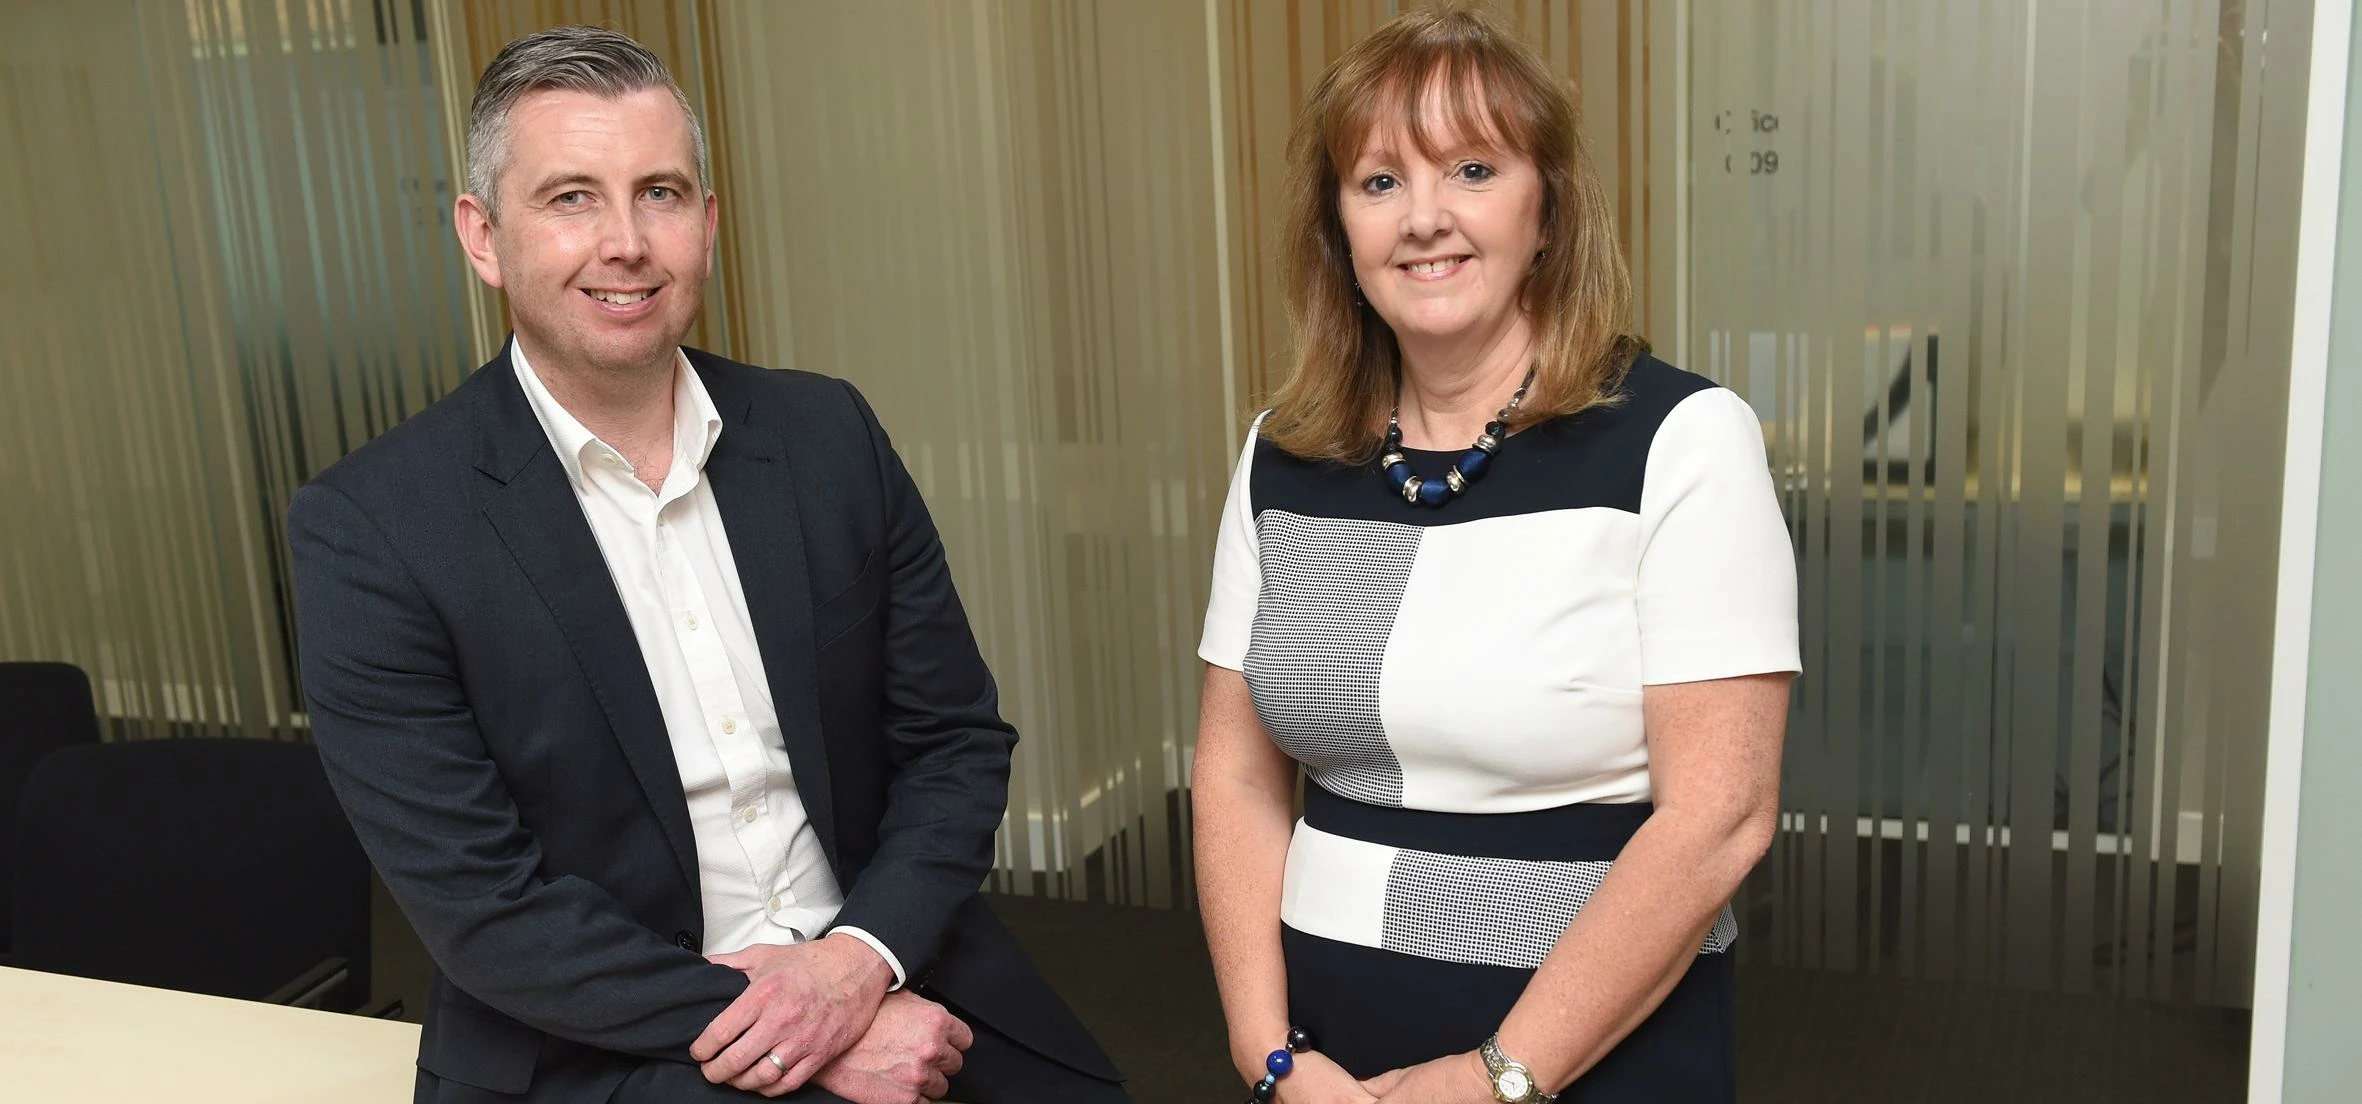 Simon Baxter, head of real estate at Primas Law, welcomes Sheila Whitton to the firm.